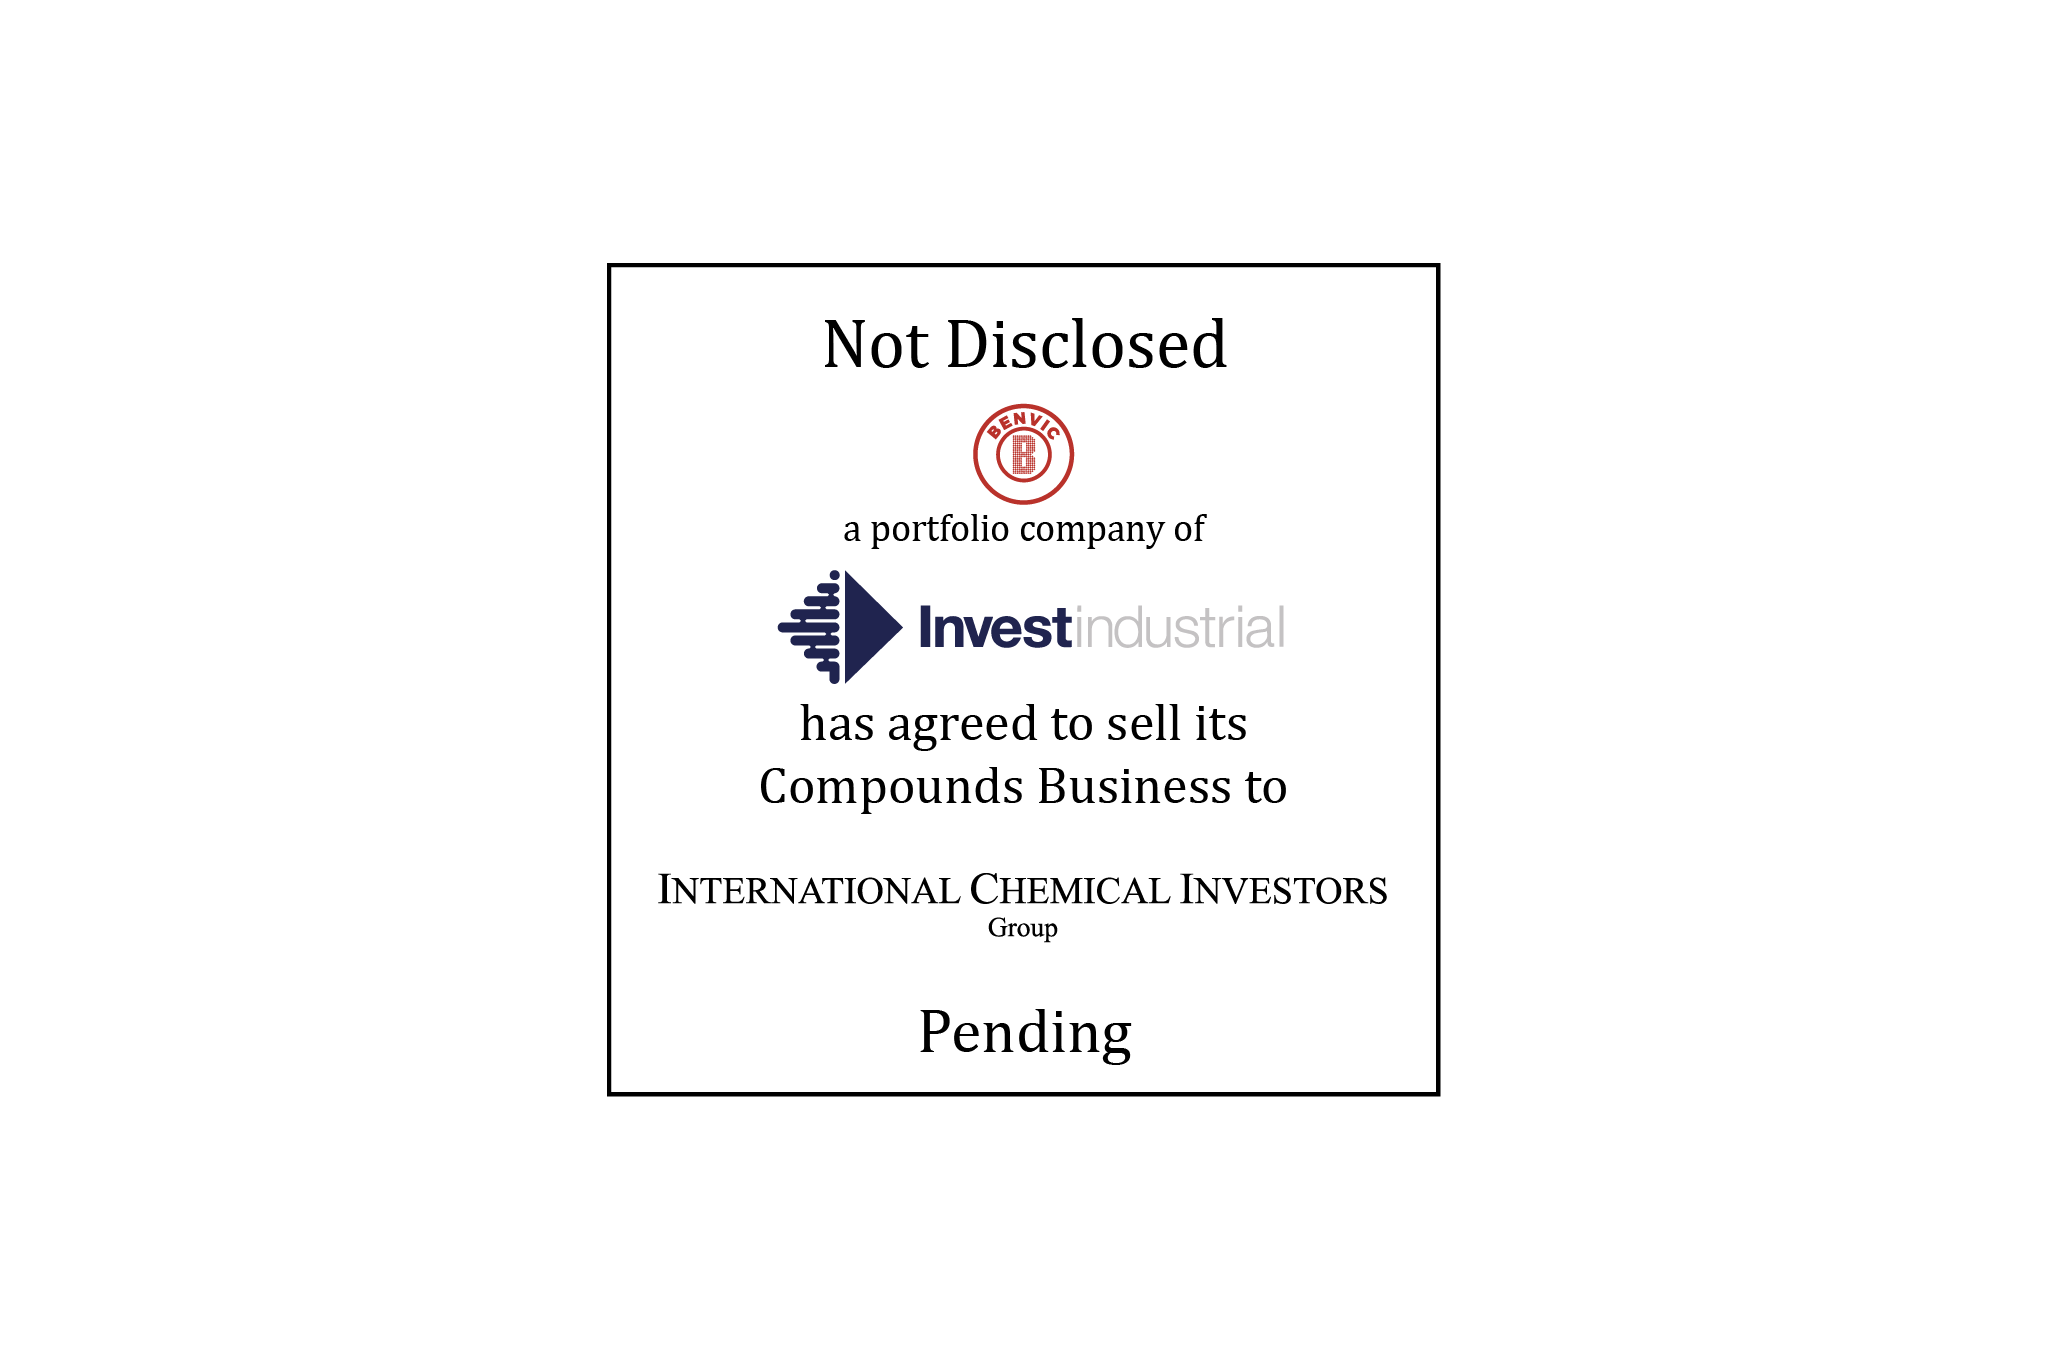 Not Disclosed | Benvic Group (logo), a portfolio company of InvestIndustrial (logo),  has agreed to sell its Compounds Business to International Chemical Investors Group (logo) | Pending